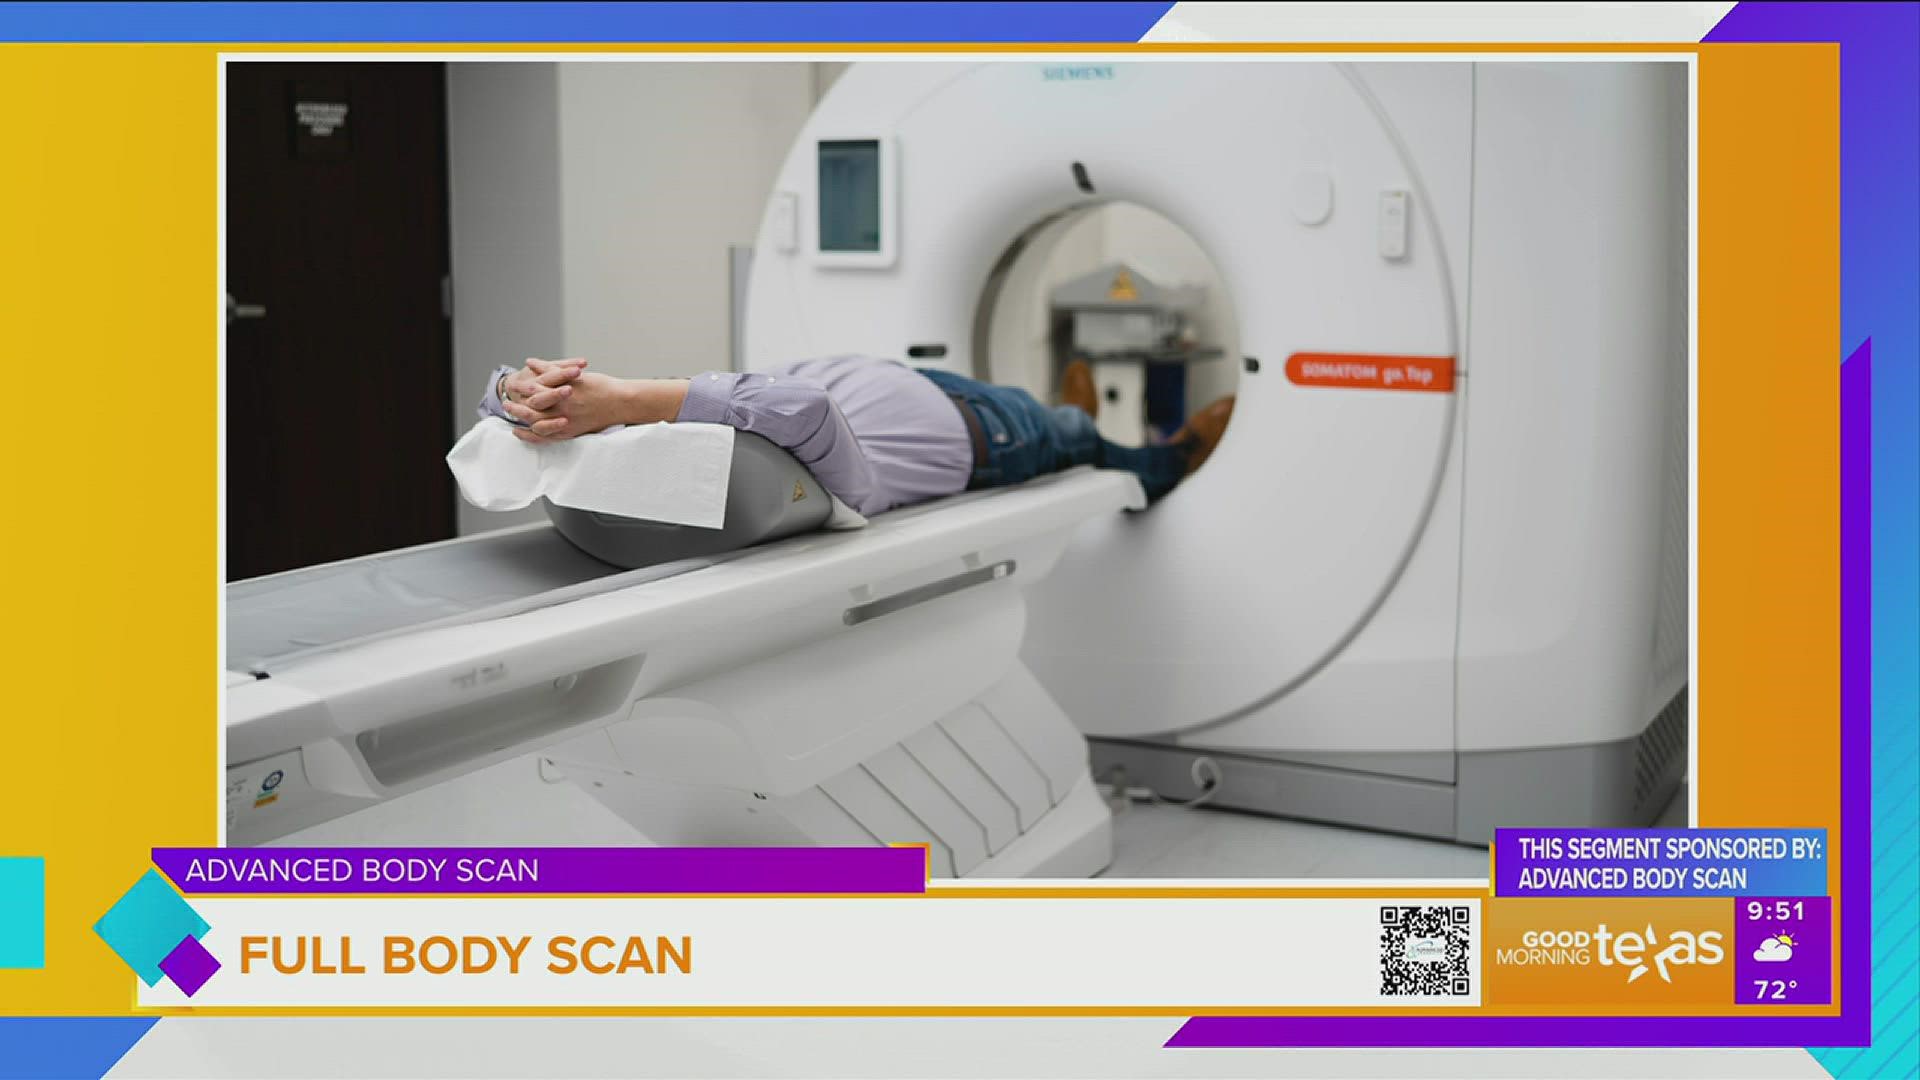 This segment is sponsored by Advanced Body Scan.